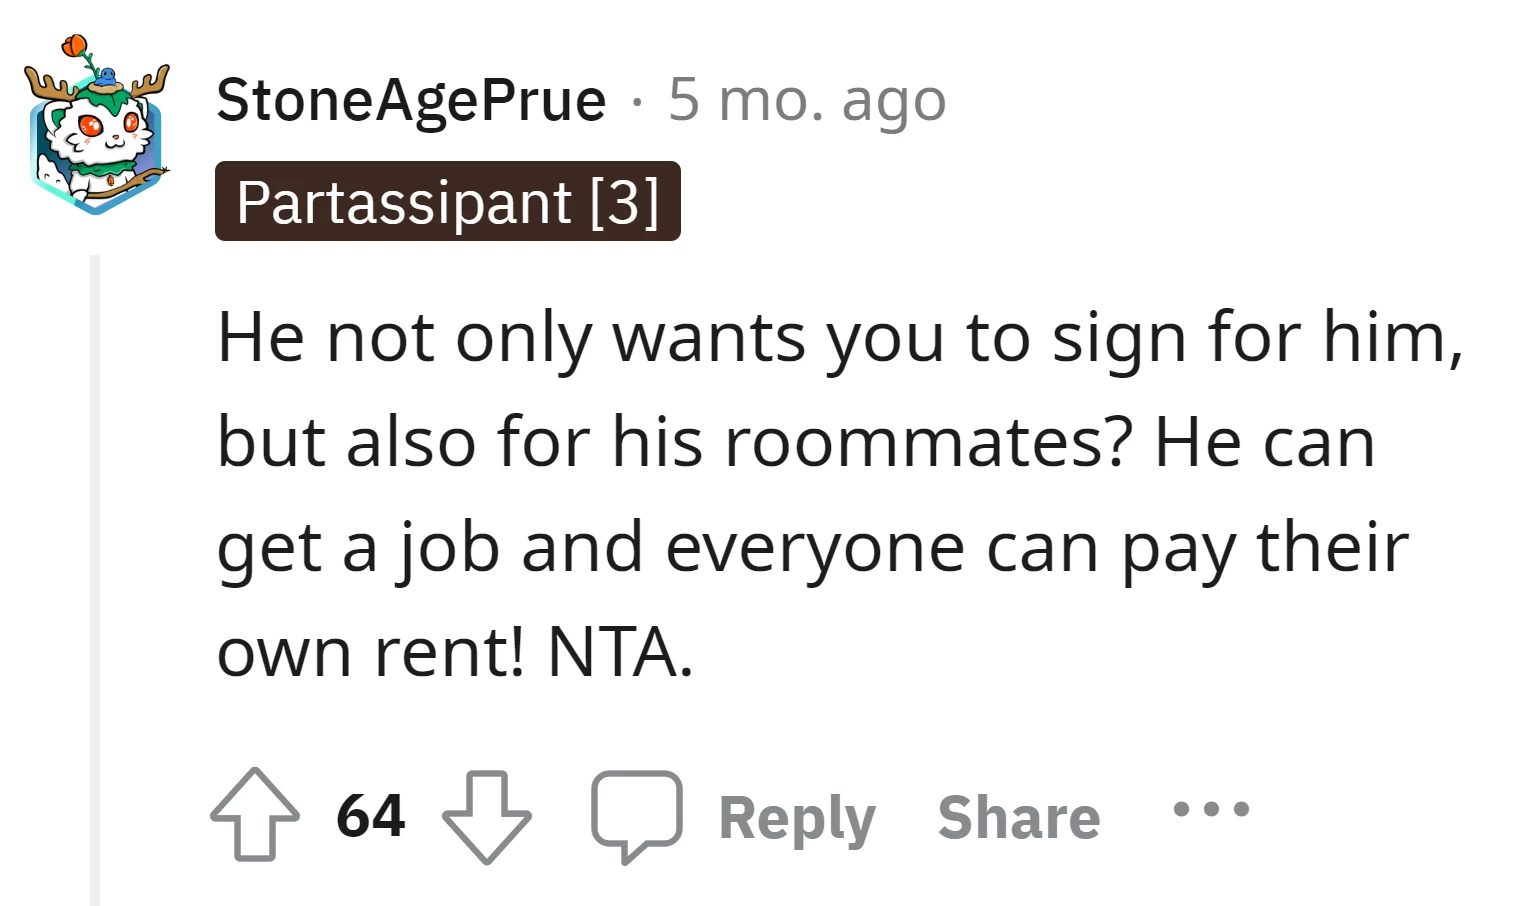 The son should get a job so everyone can cover their own rent